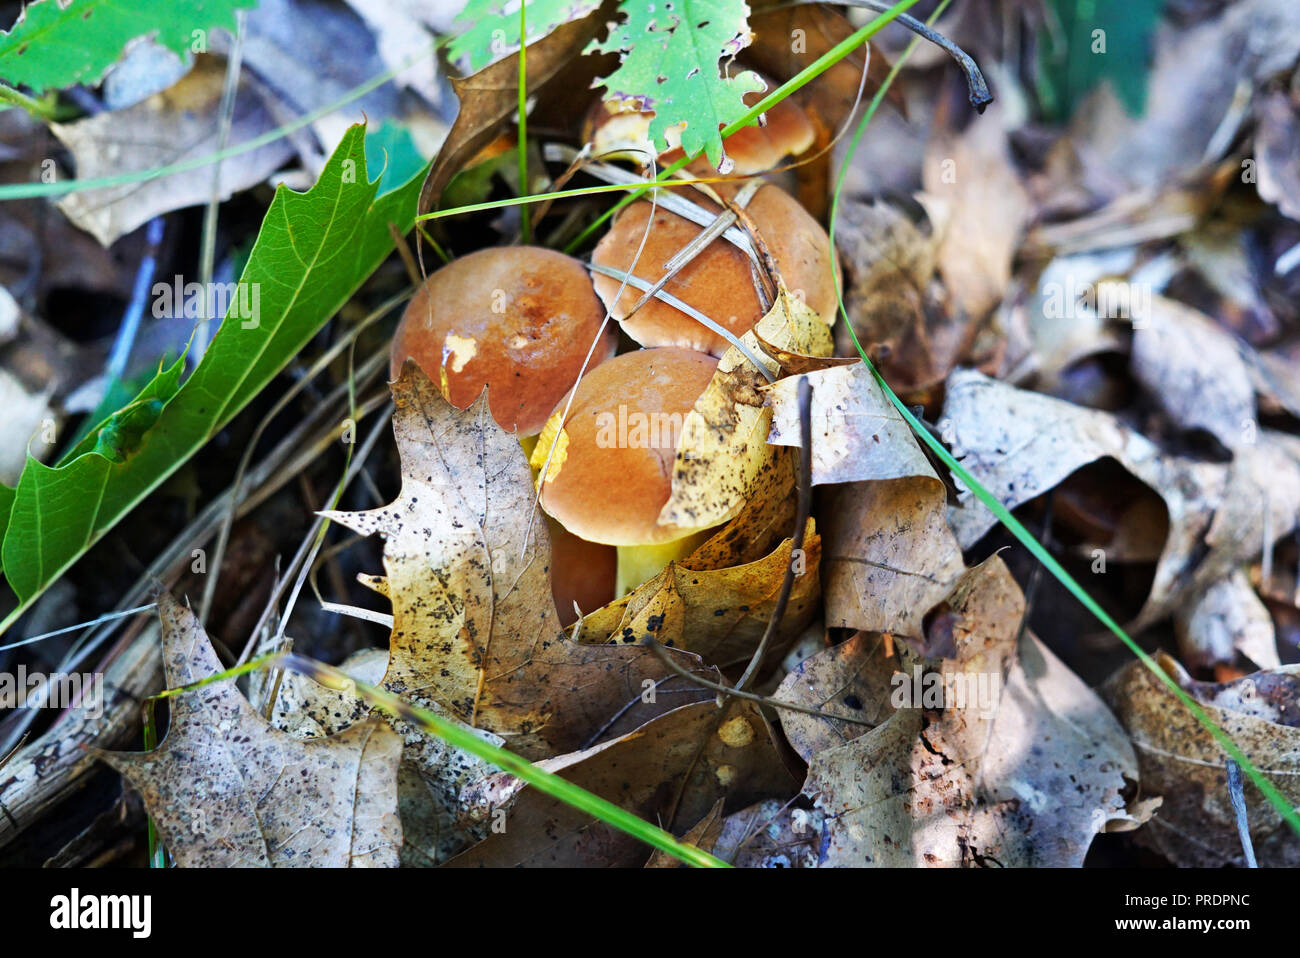 A group of young Mushrooms with a brown hat made their way from under the dry foliage in the forest. Wild Fungi are surrounded by large old and green  Stock Photo